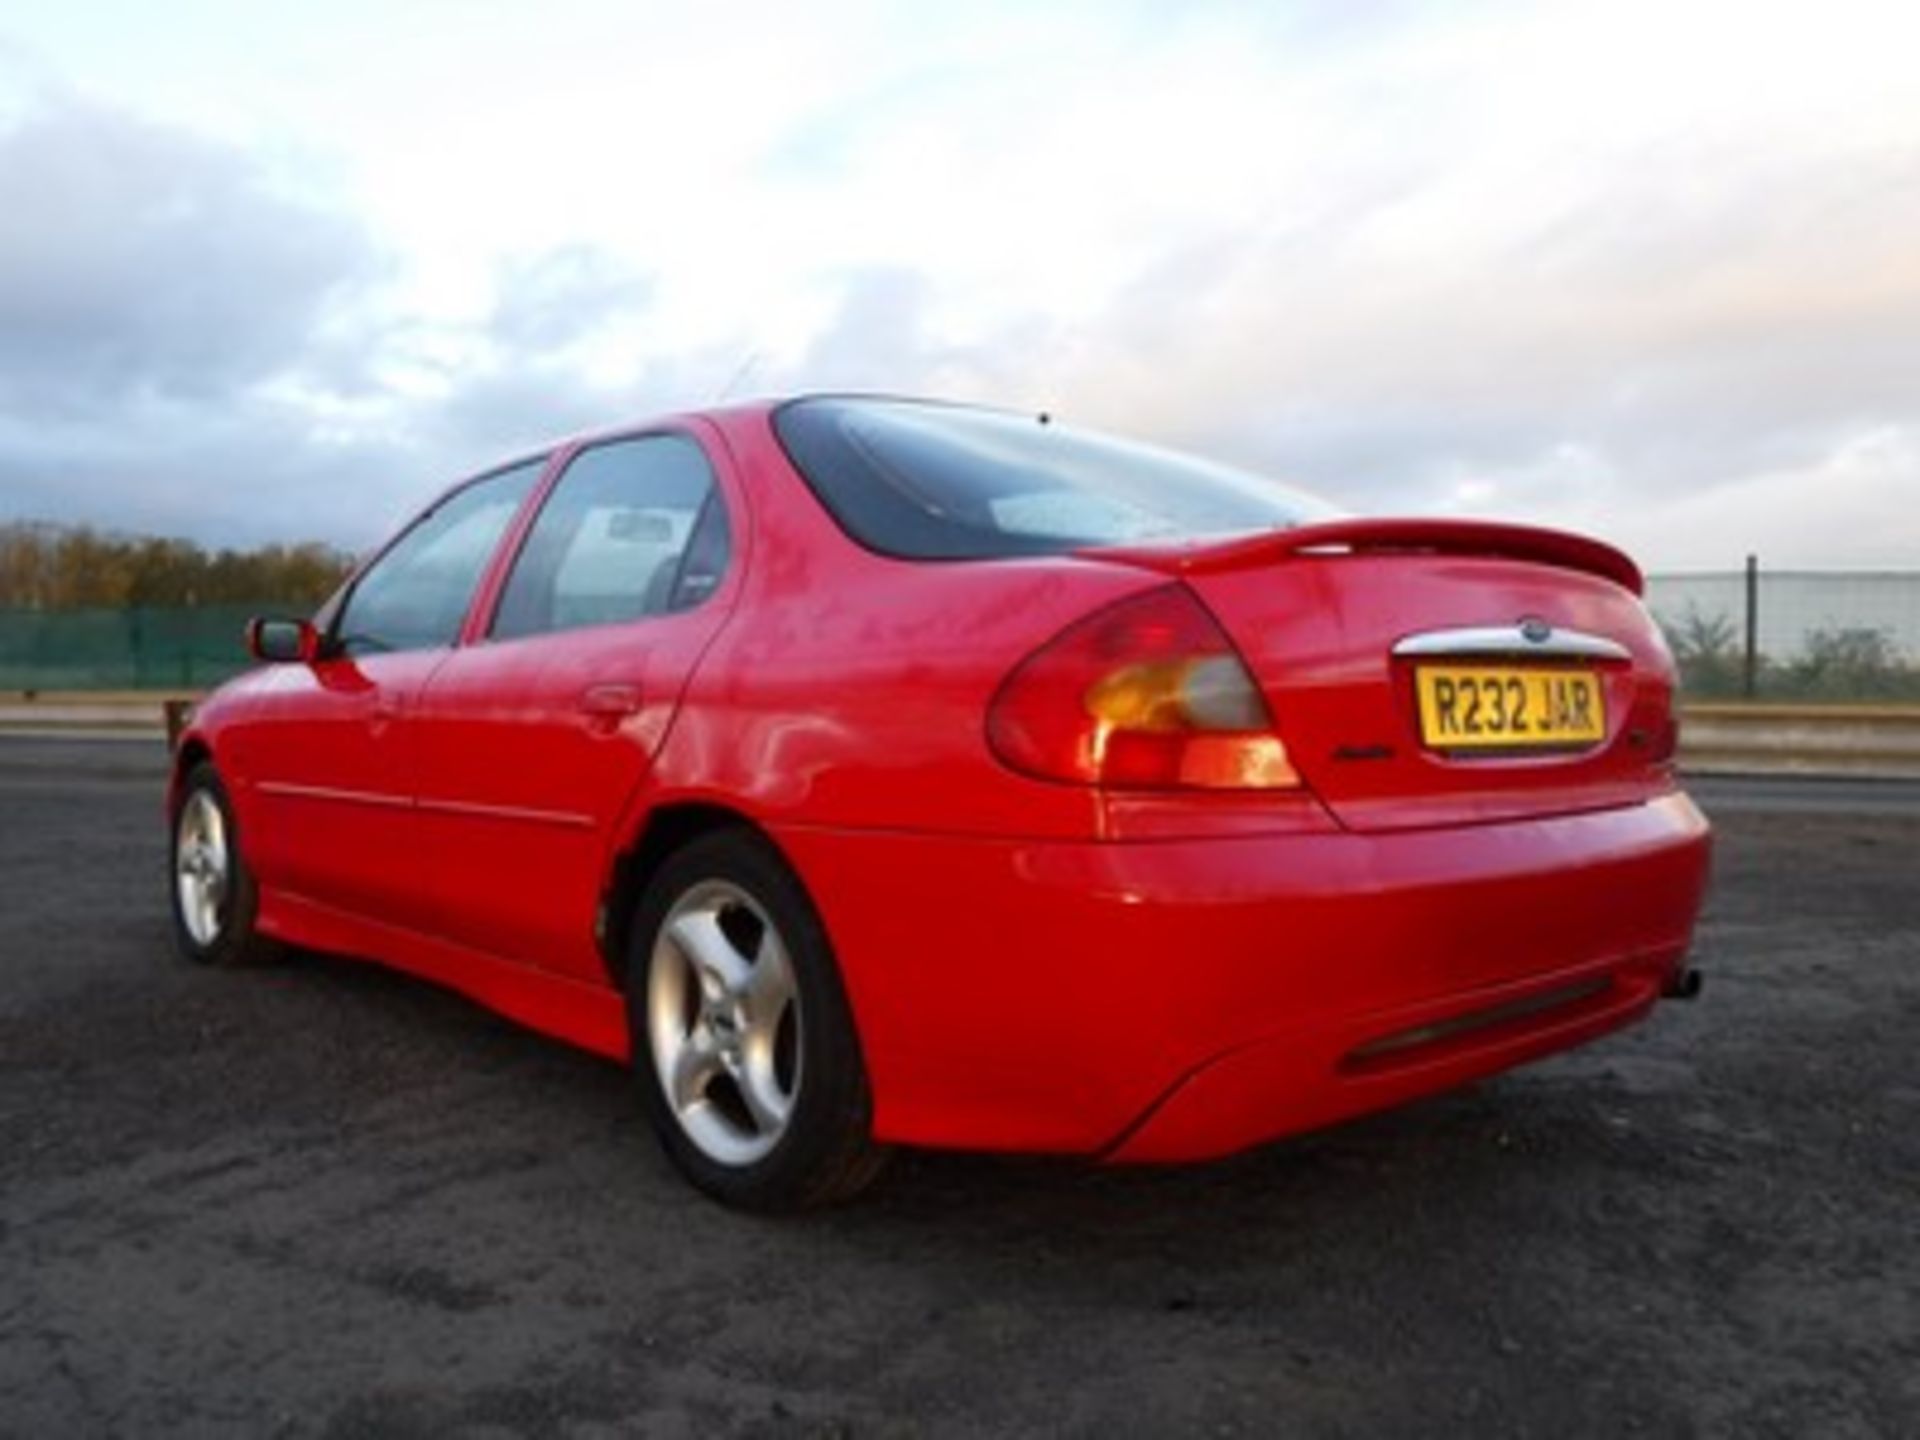 FORD MONDEO ST 24 V6 - 2497cc - Image 10 of 24